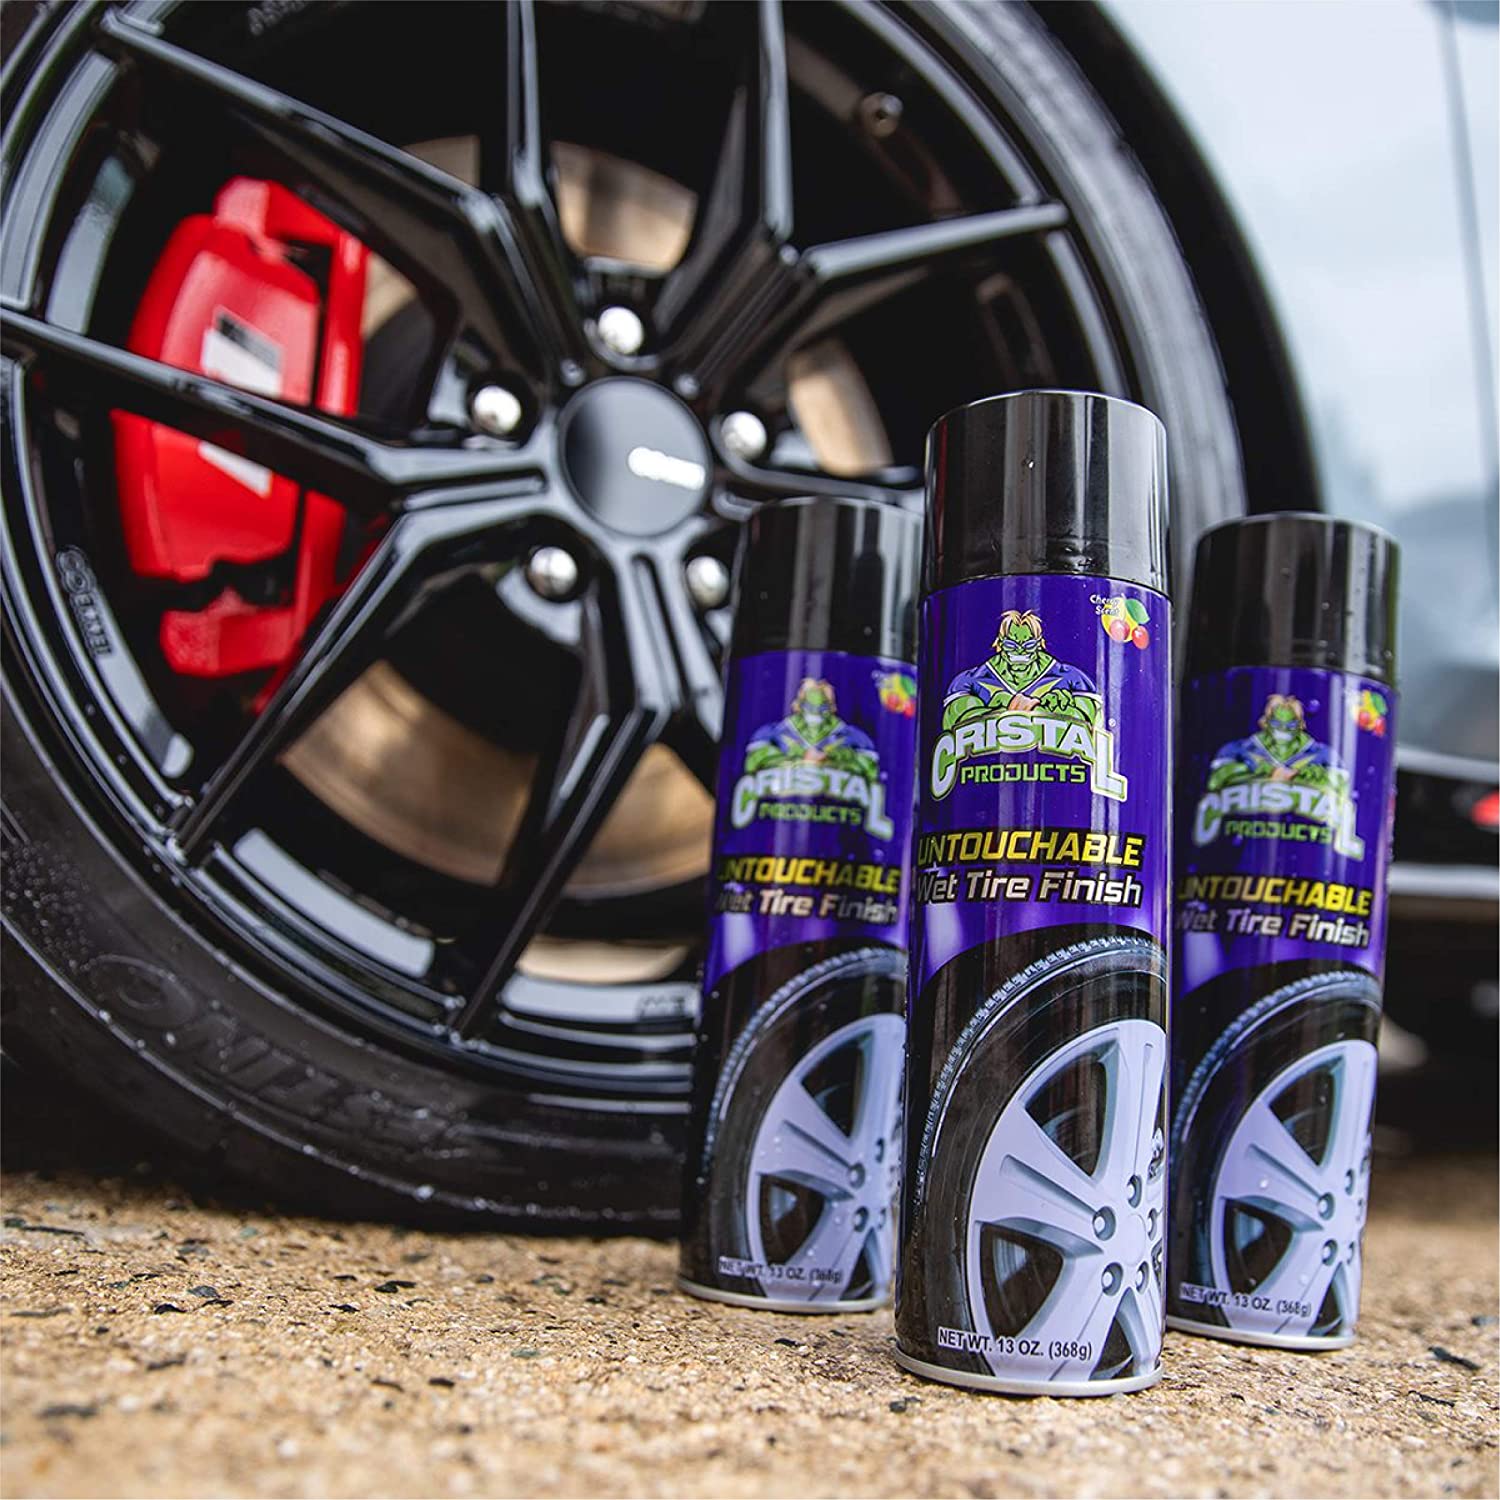 NEW Cristal Products Untouchable Wet Tire Shine Finish Spray Can